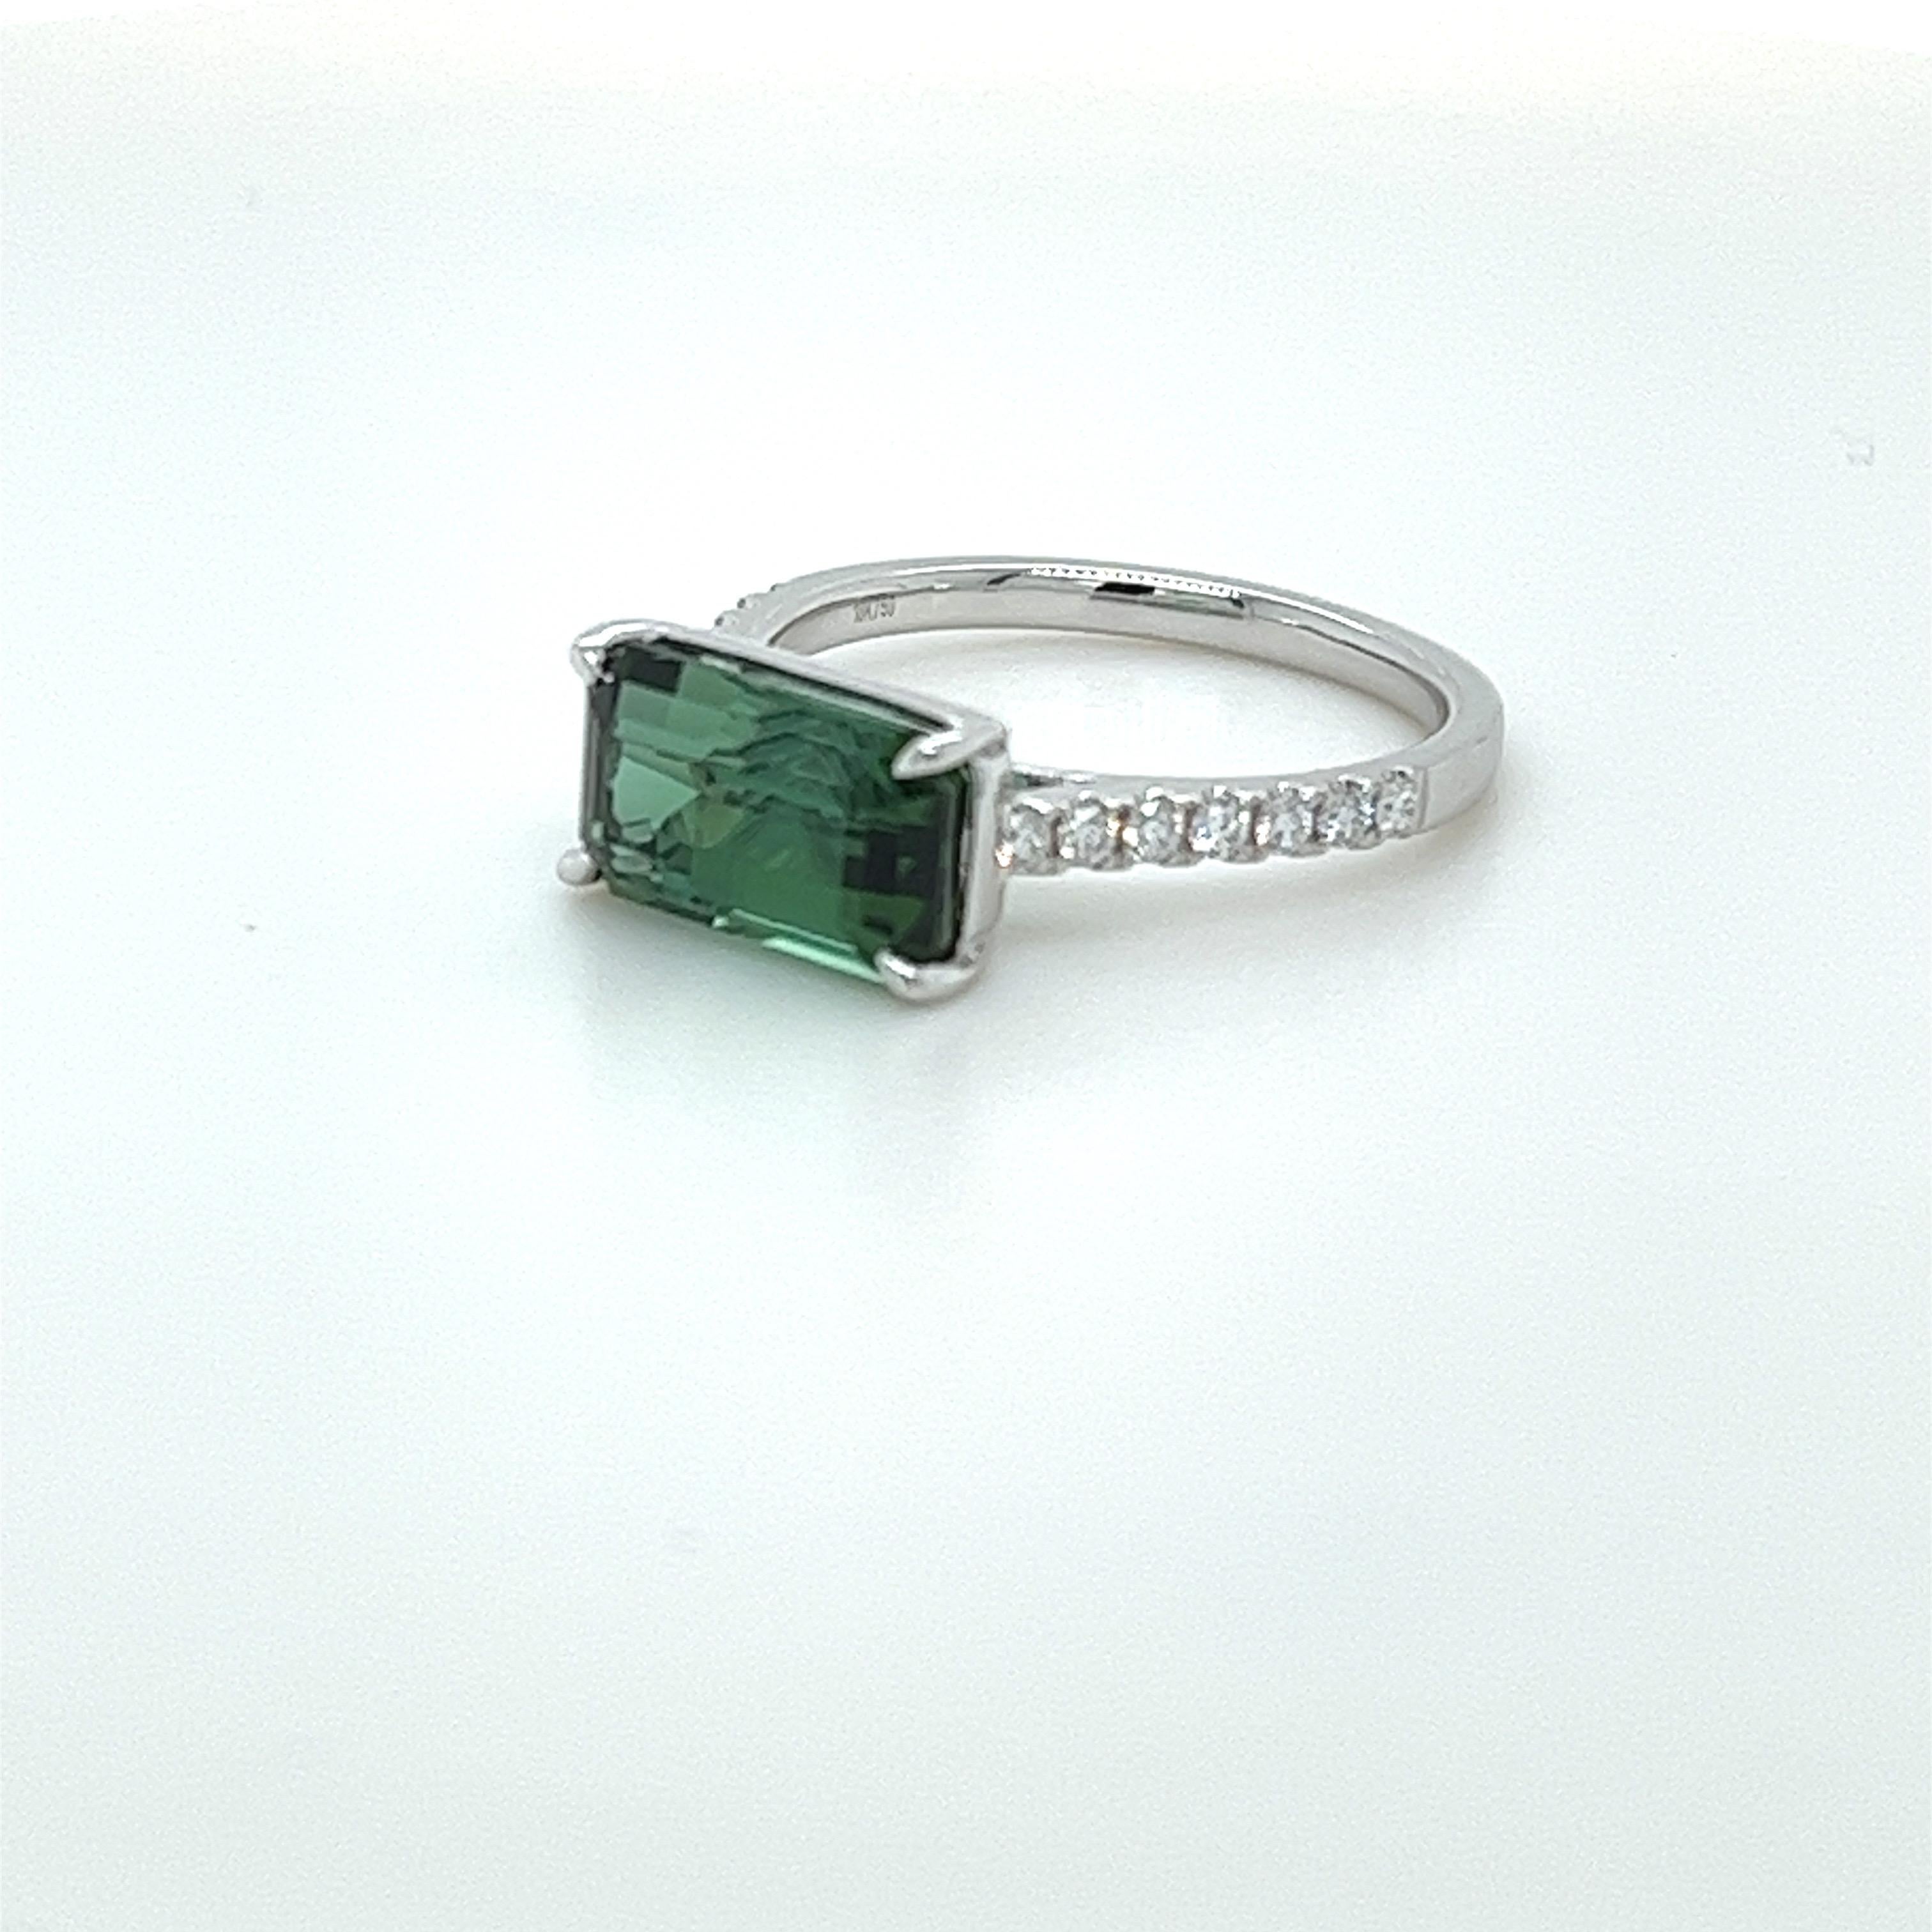 Emerald Cut Green Tourmaline weighing 3.68 carats
Measuring (11.2x6.6) mm
14 pieces of round diamonds weighing .21 carats
GH-Si1 quality
Set in 18 karat white gold ring
3.23 grams
Very fashionable everyday ring